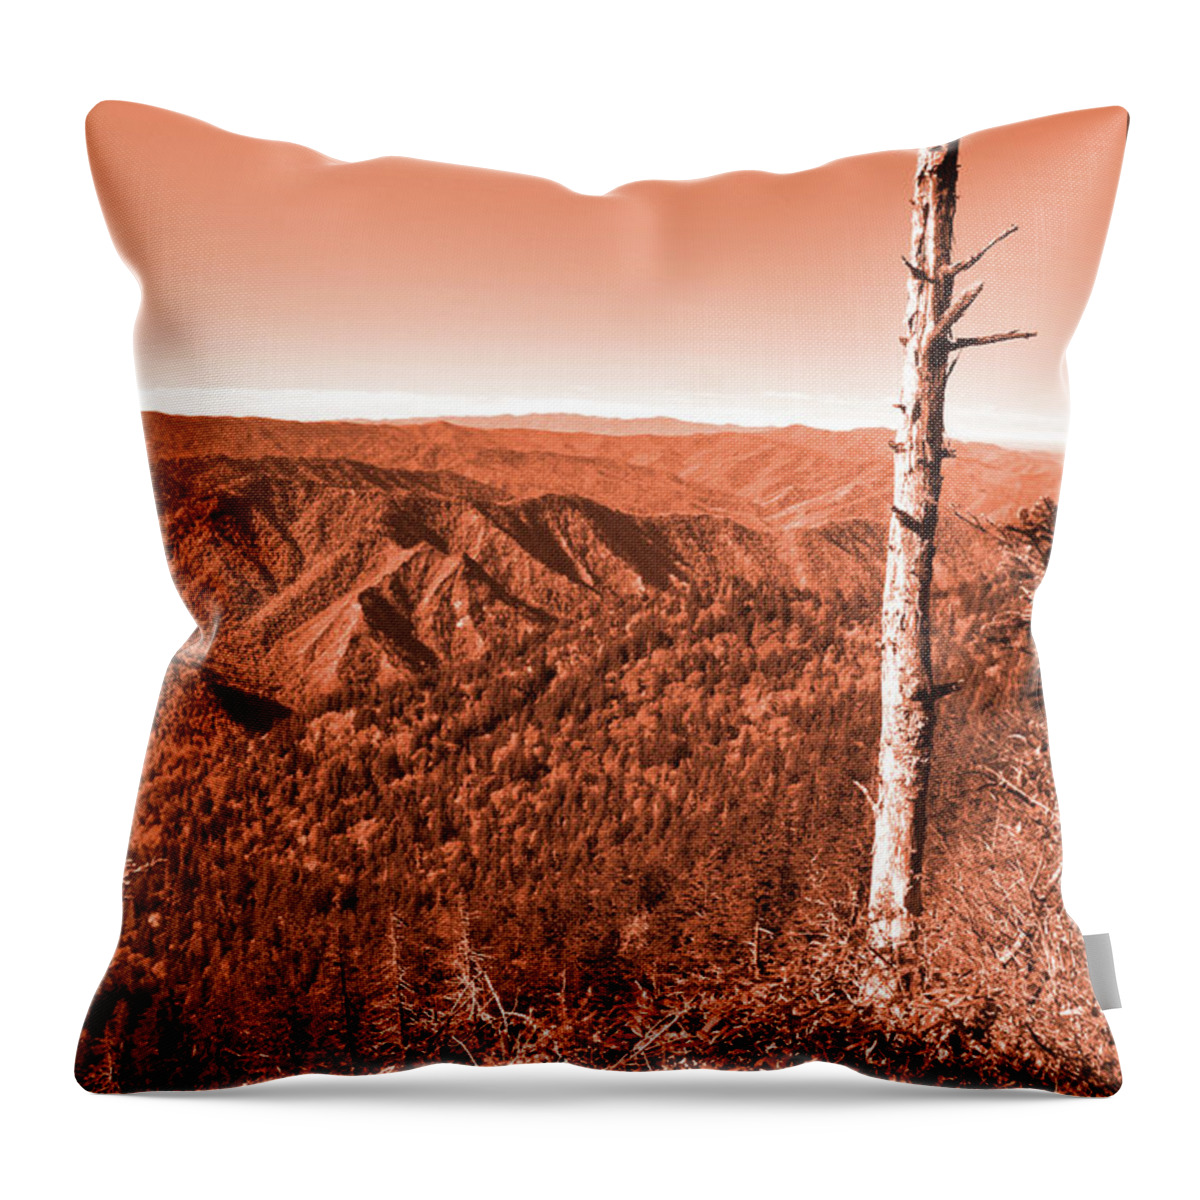 Mount Leconte Throw Pillow featuring the digital art Orange Mountain Landscape by Phil Perkins